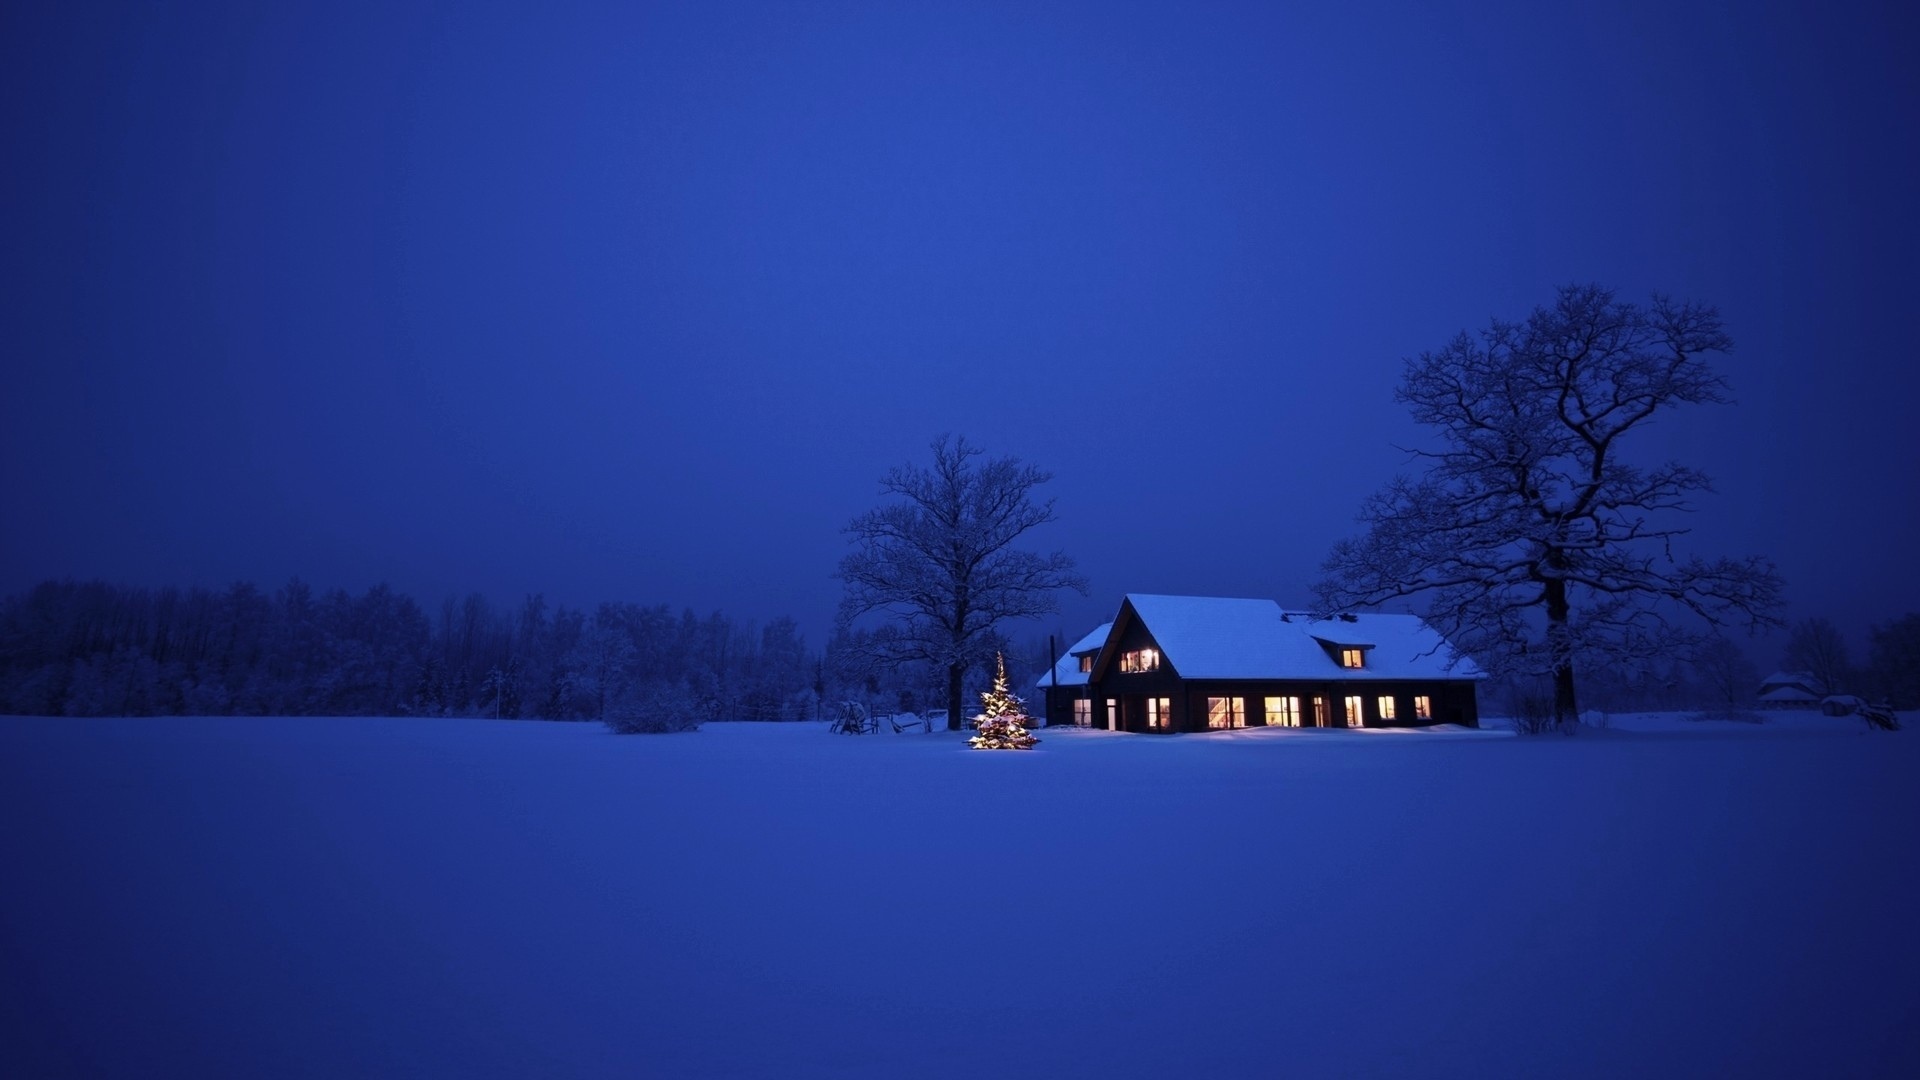 snow, christmas, xmas, new year, landscape, holidays, winter, houses, blue